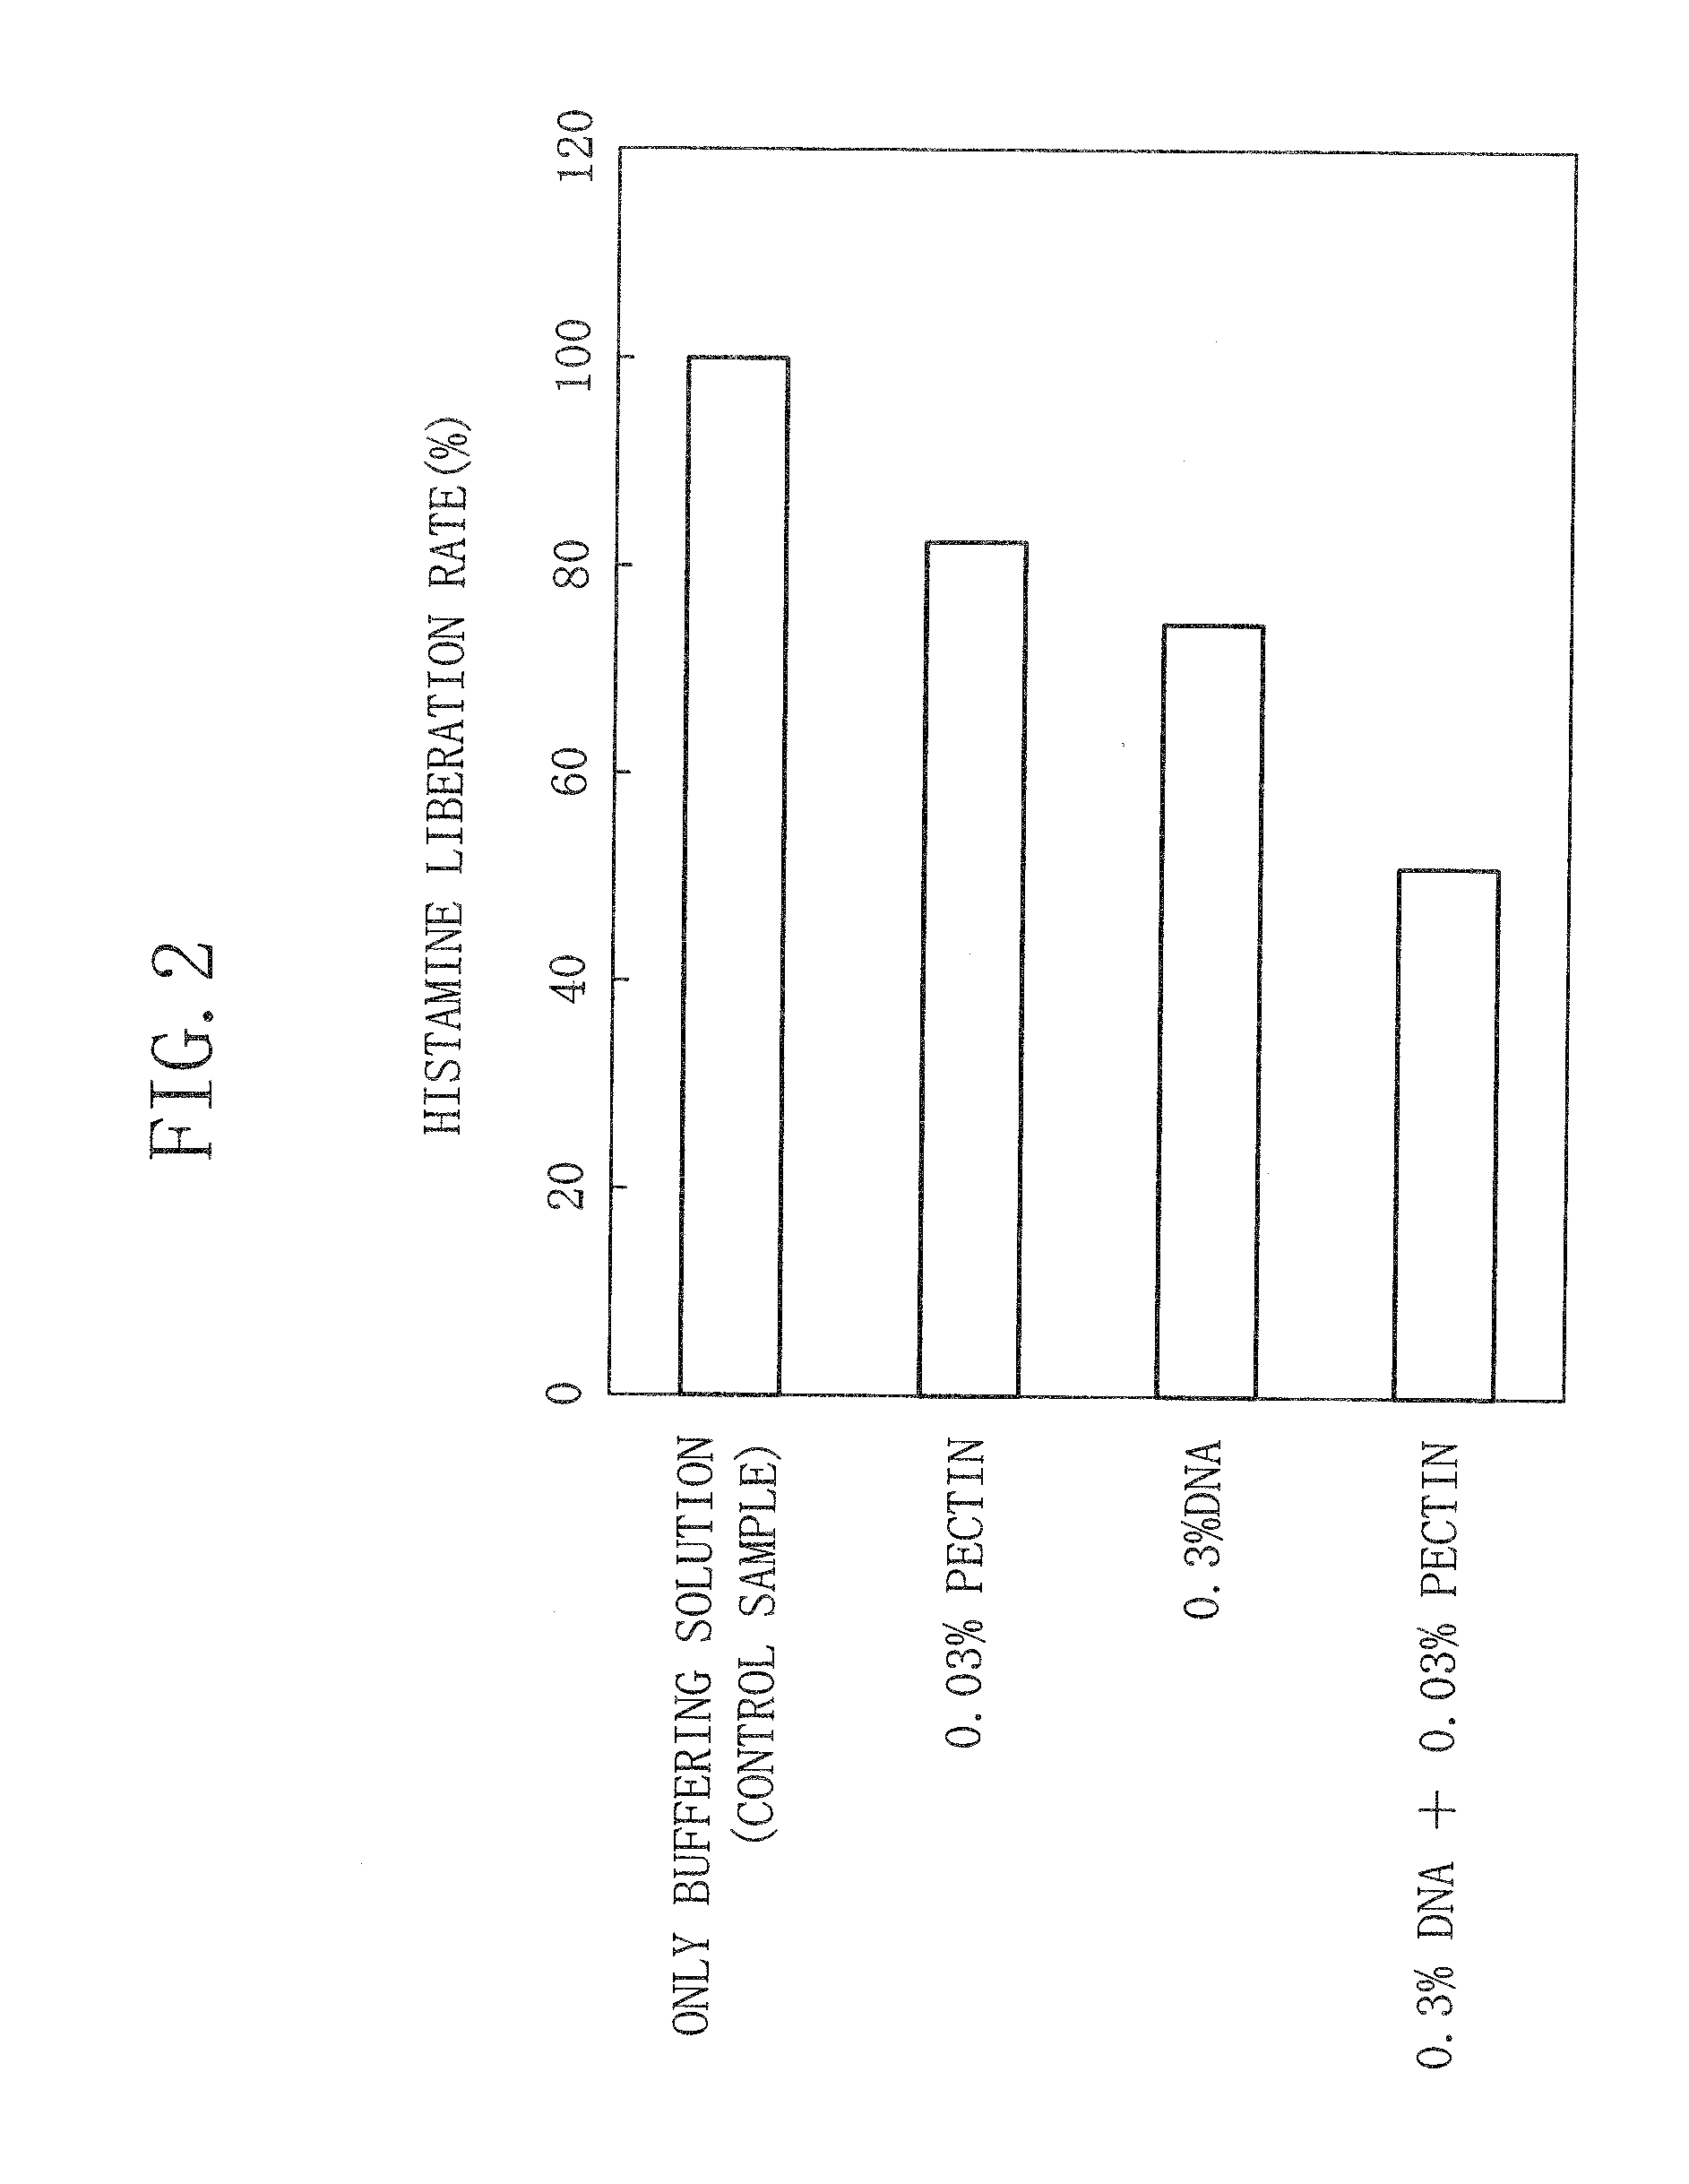 Method for inhibiting onset of or treating pollen allergy